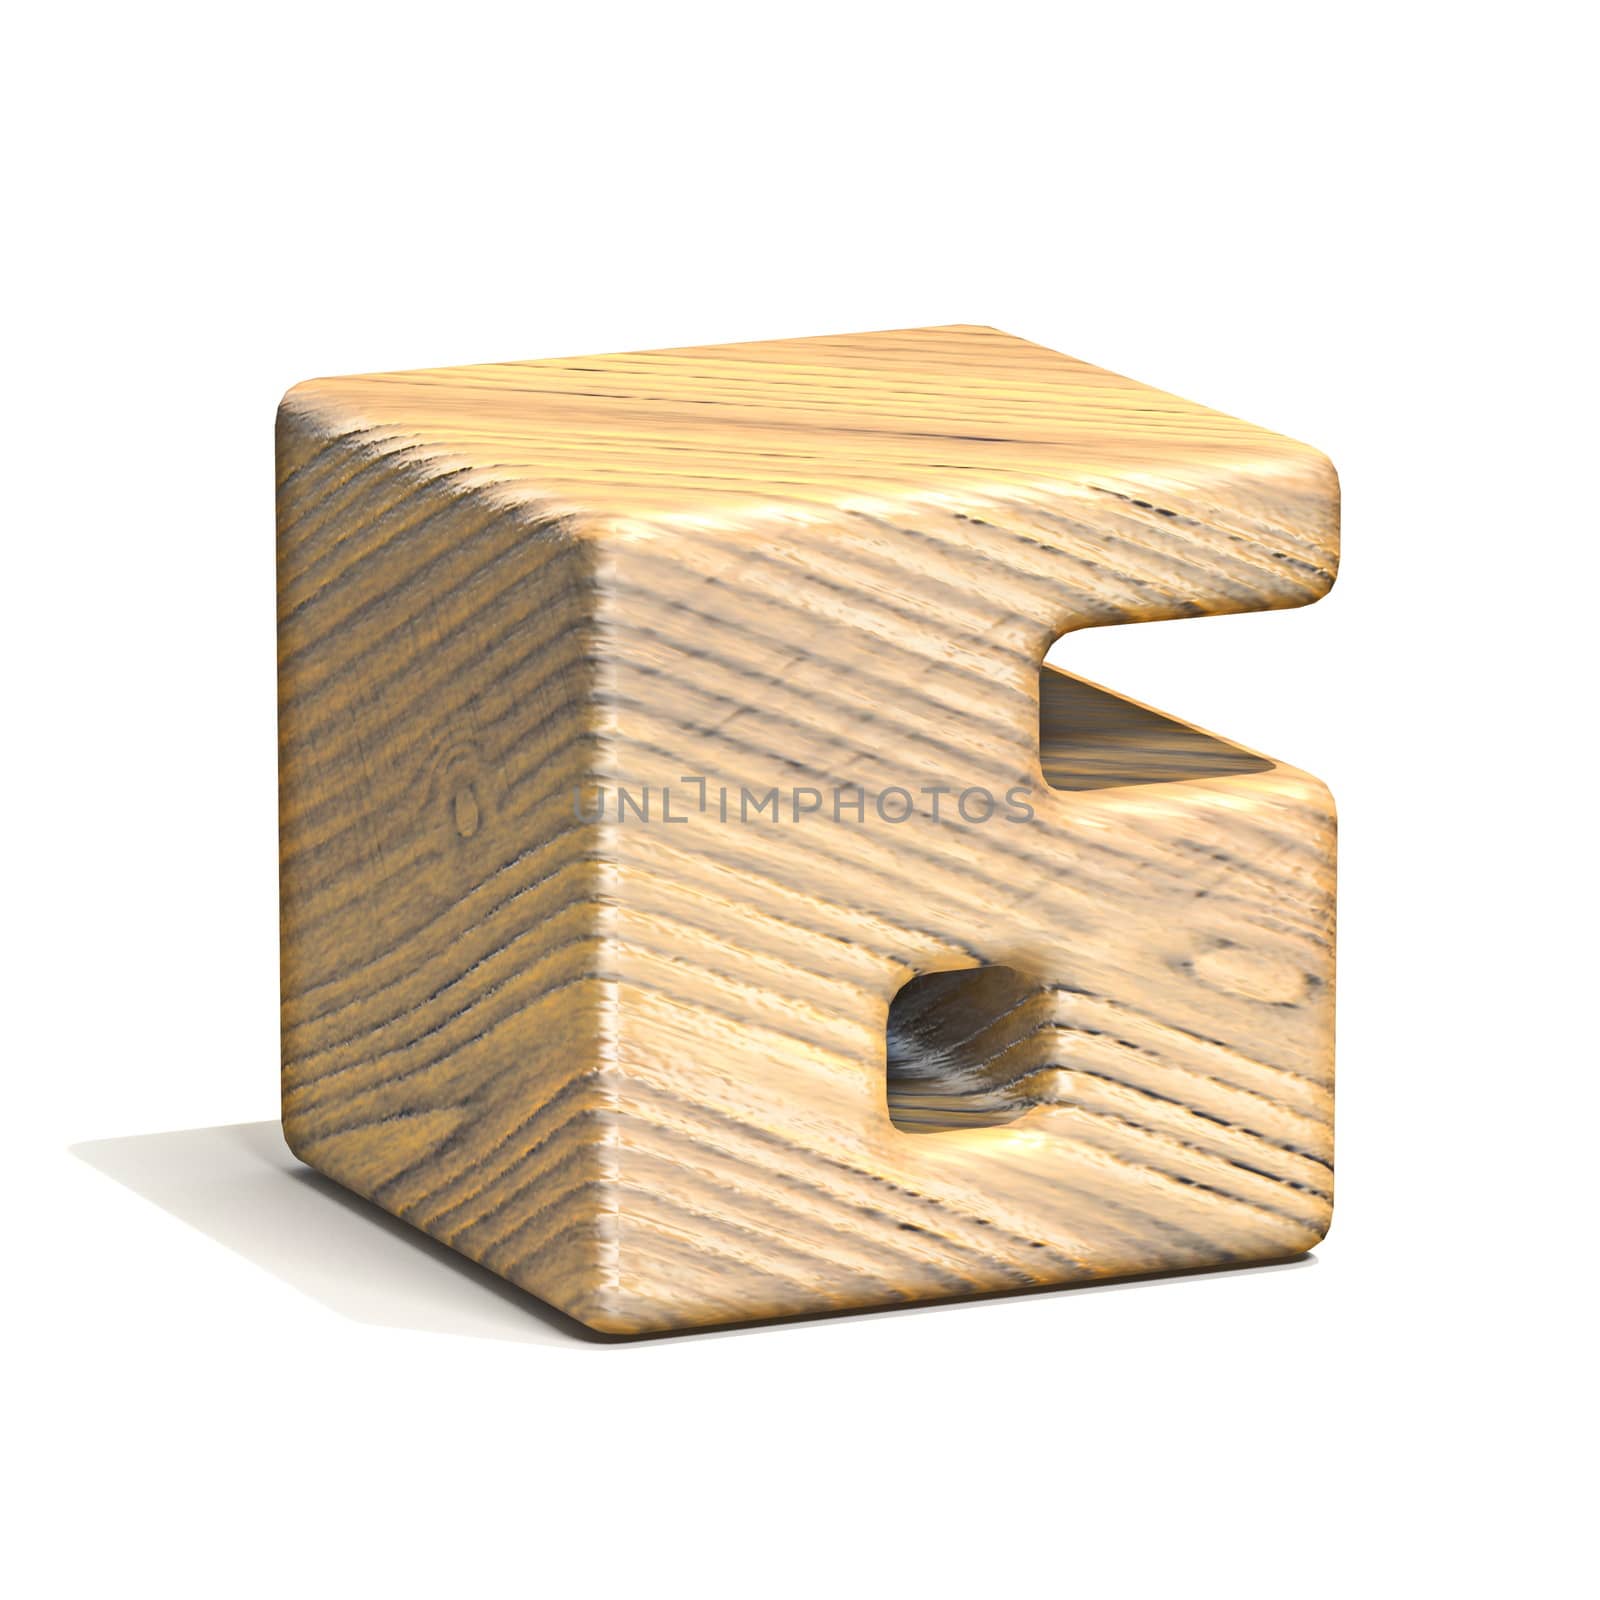 Solid wooden cube font Number 6 SIX 3D by djmilic